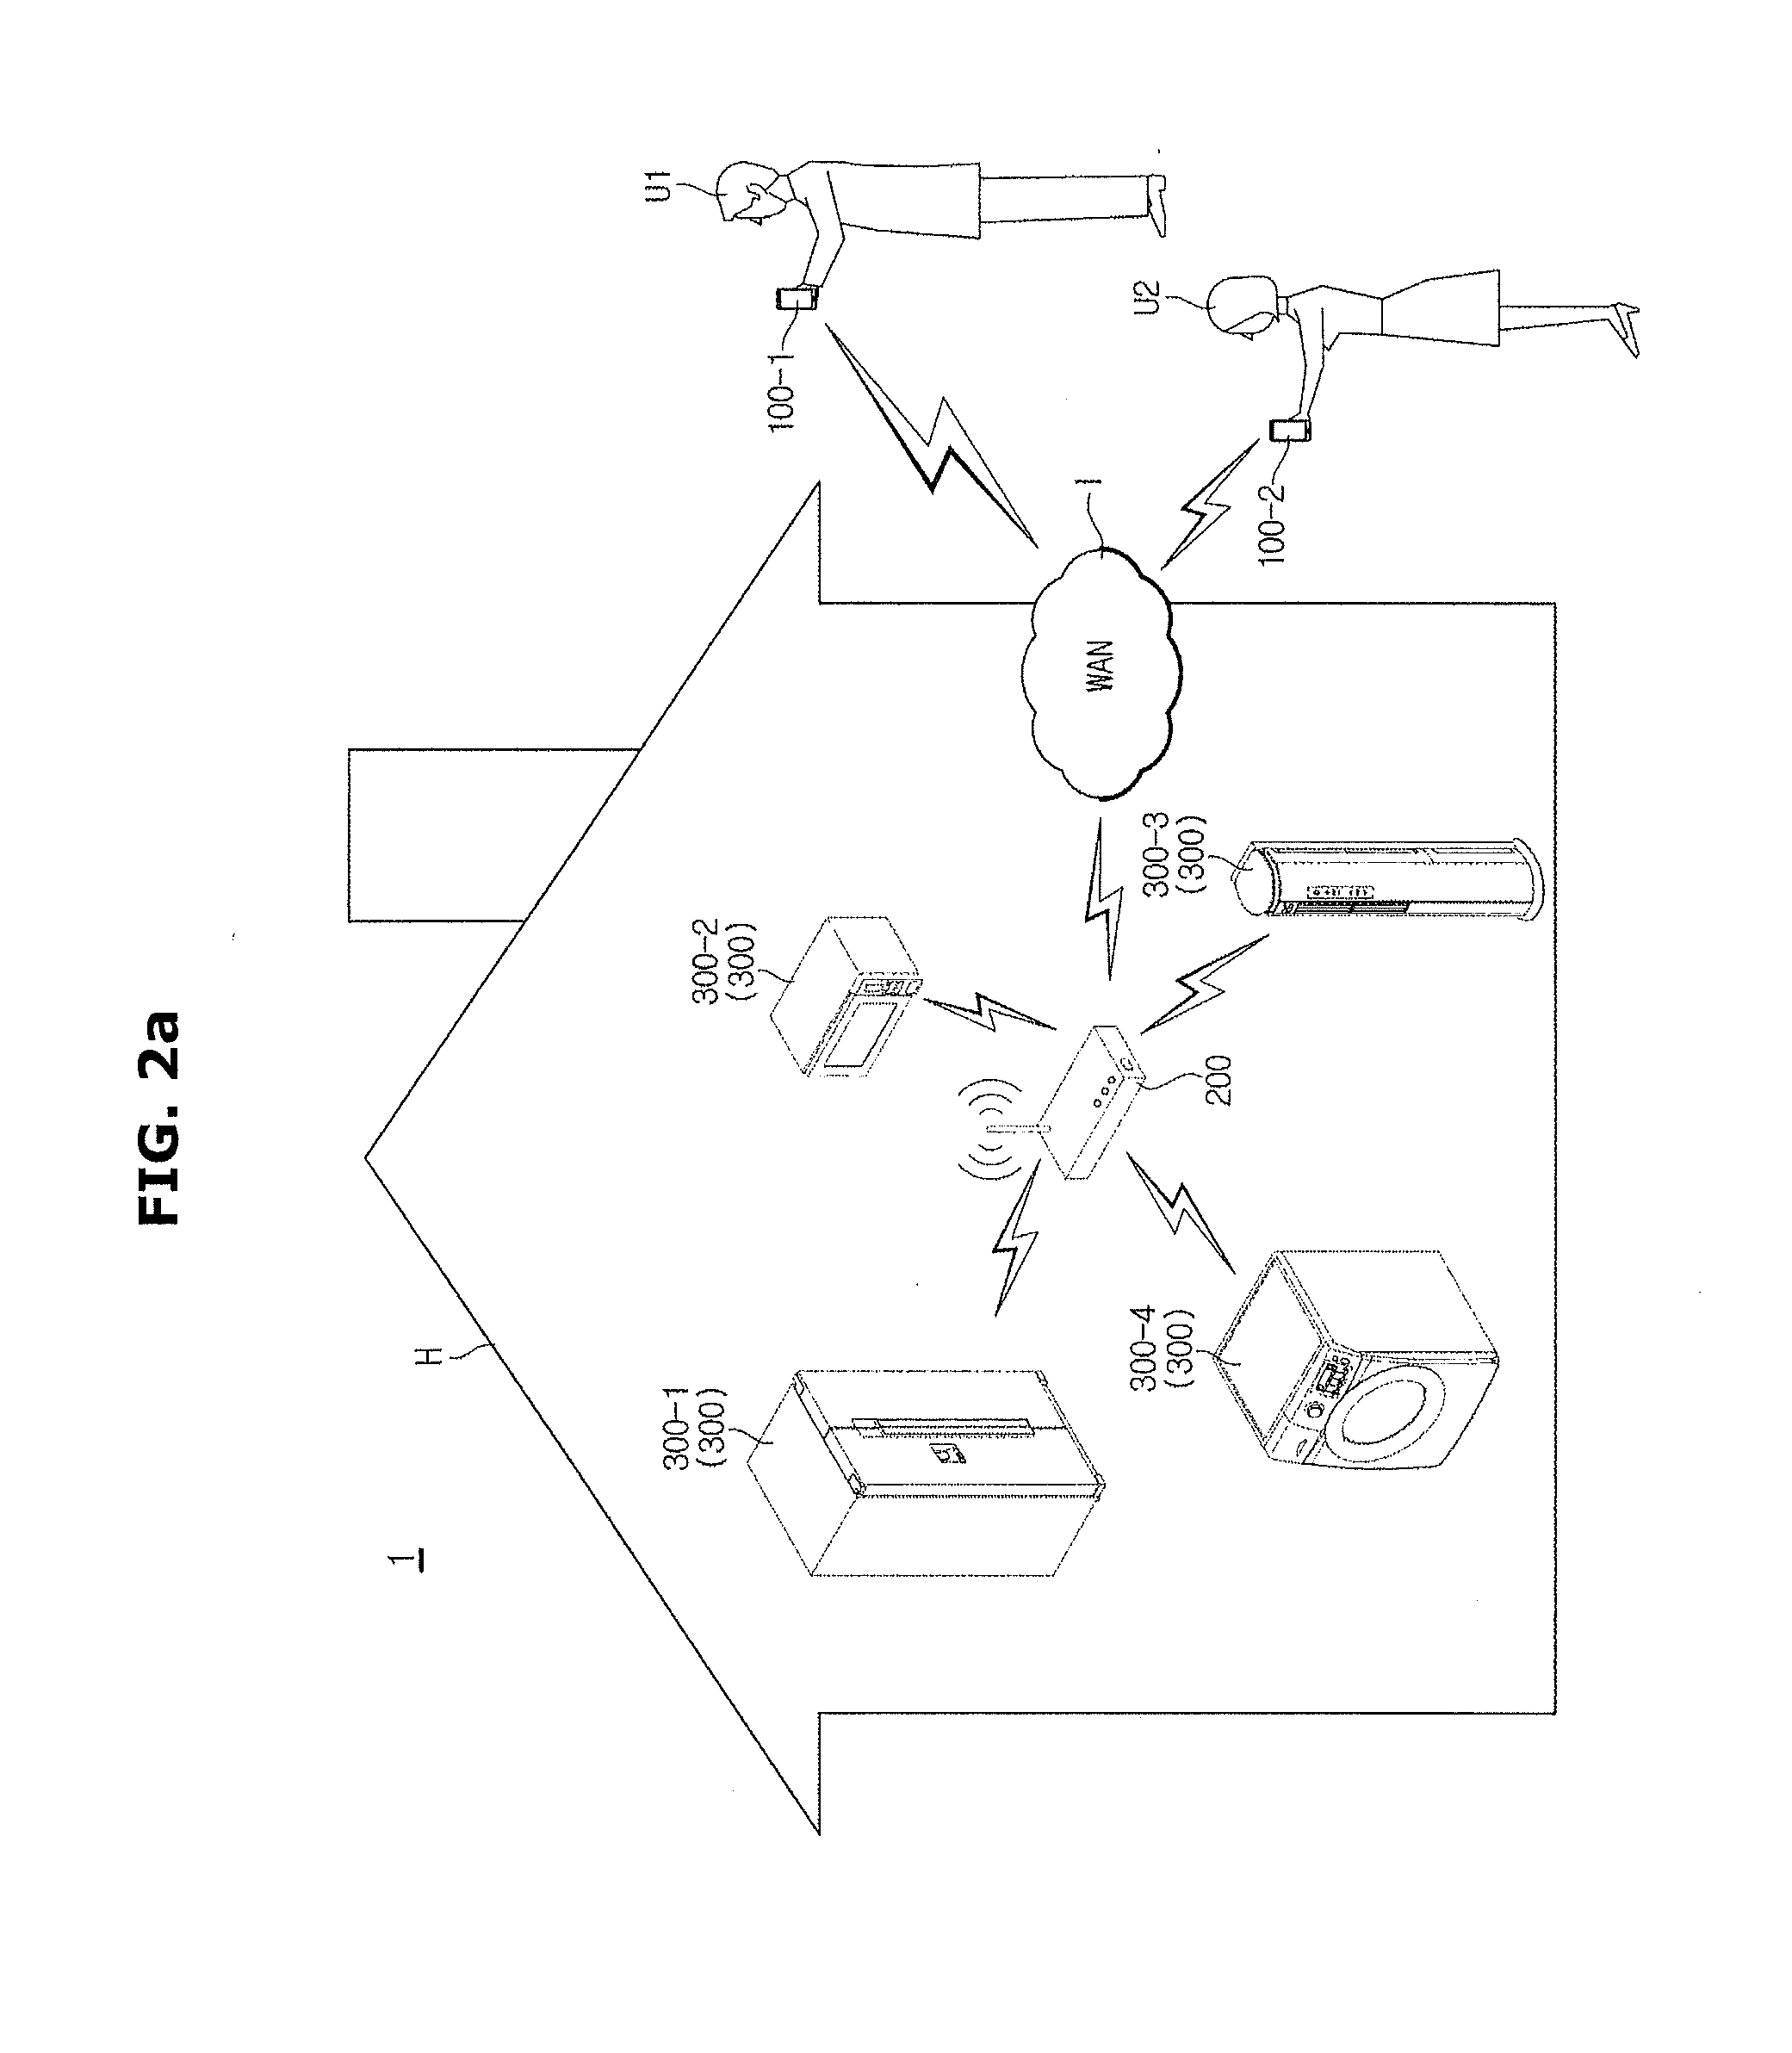 Home appliance and home network system using the same